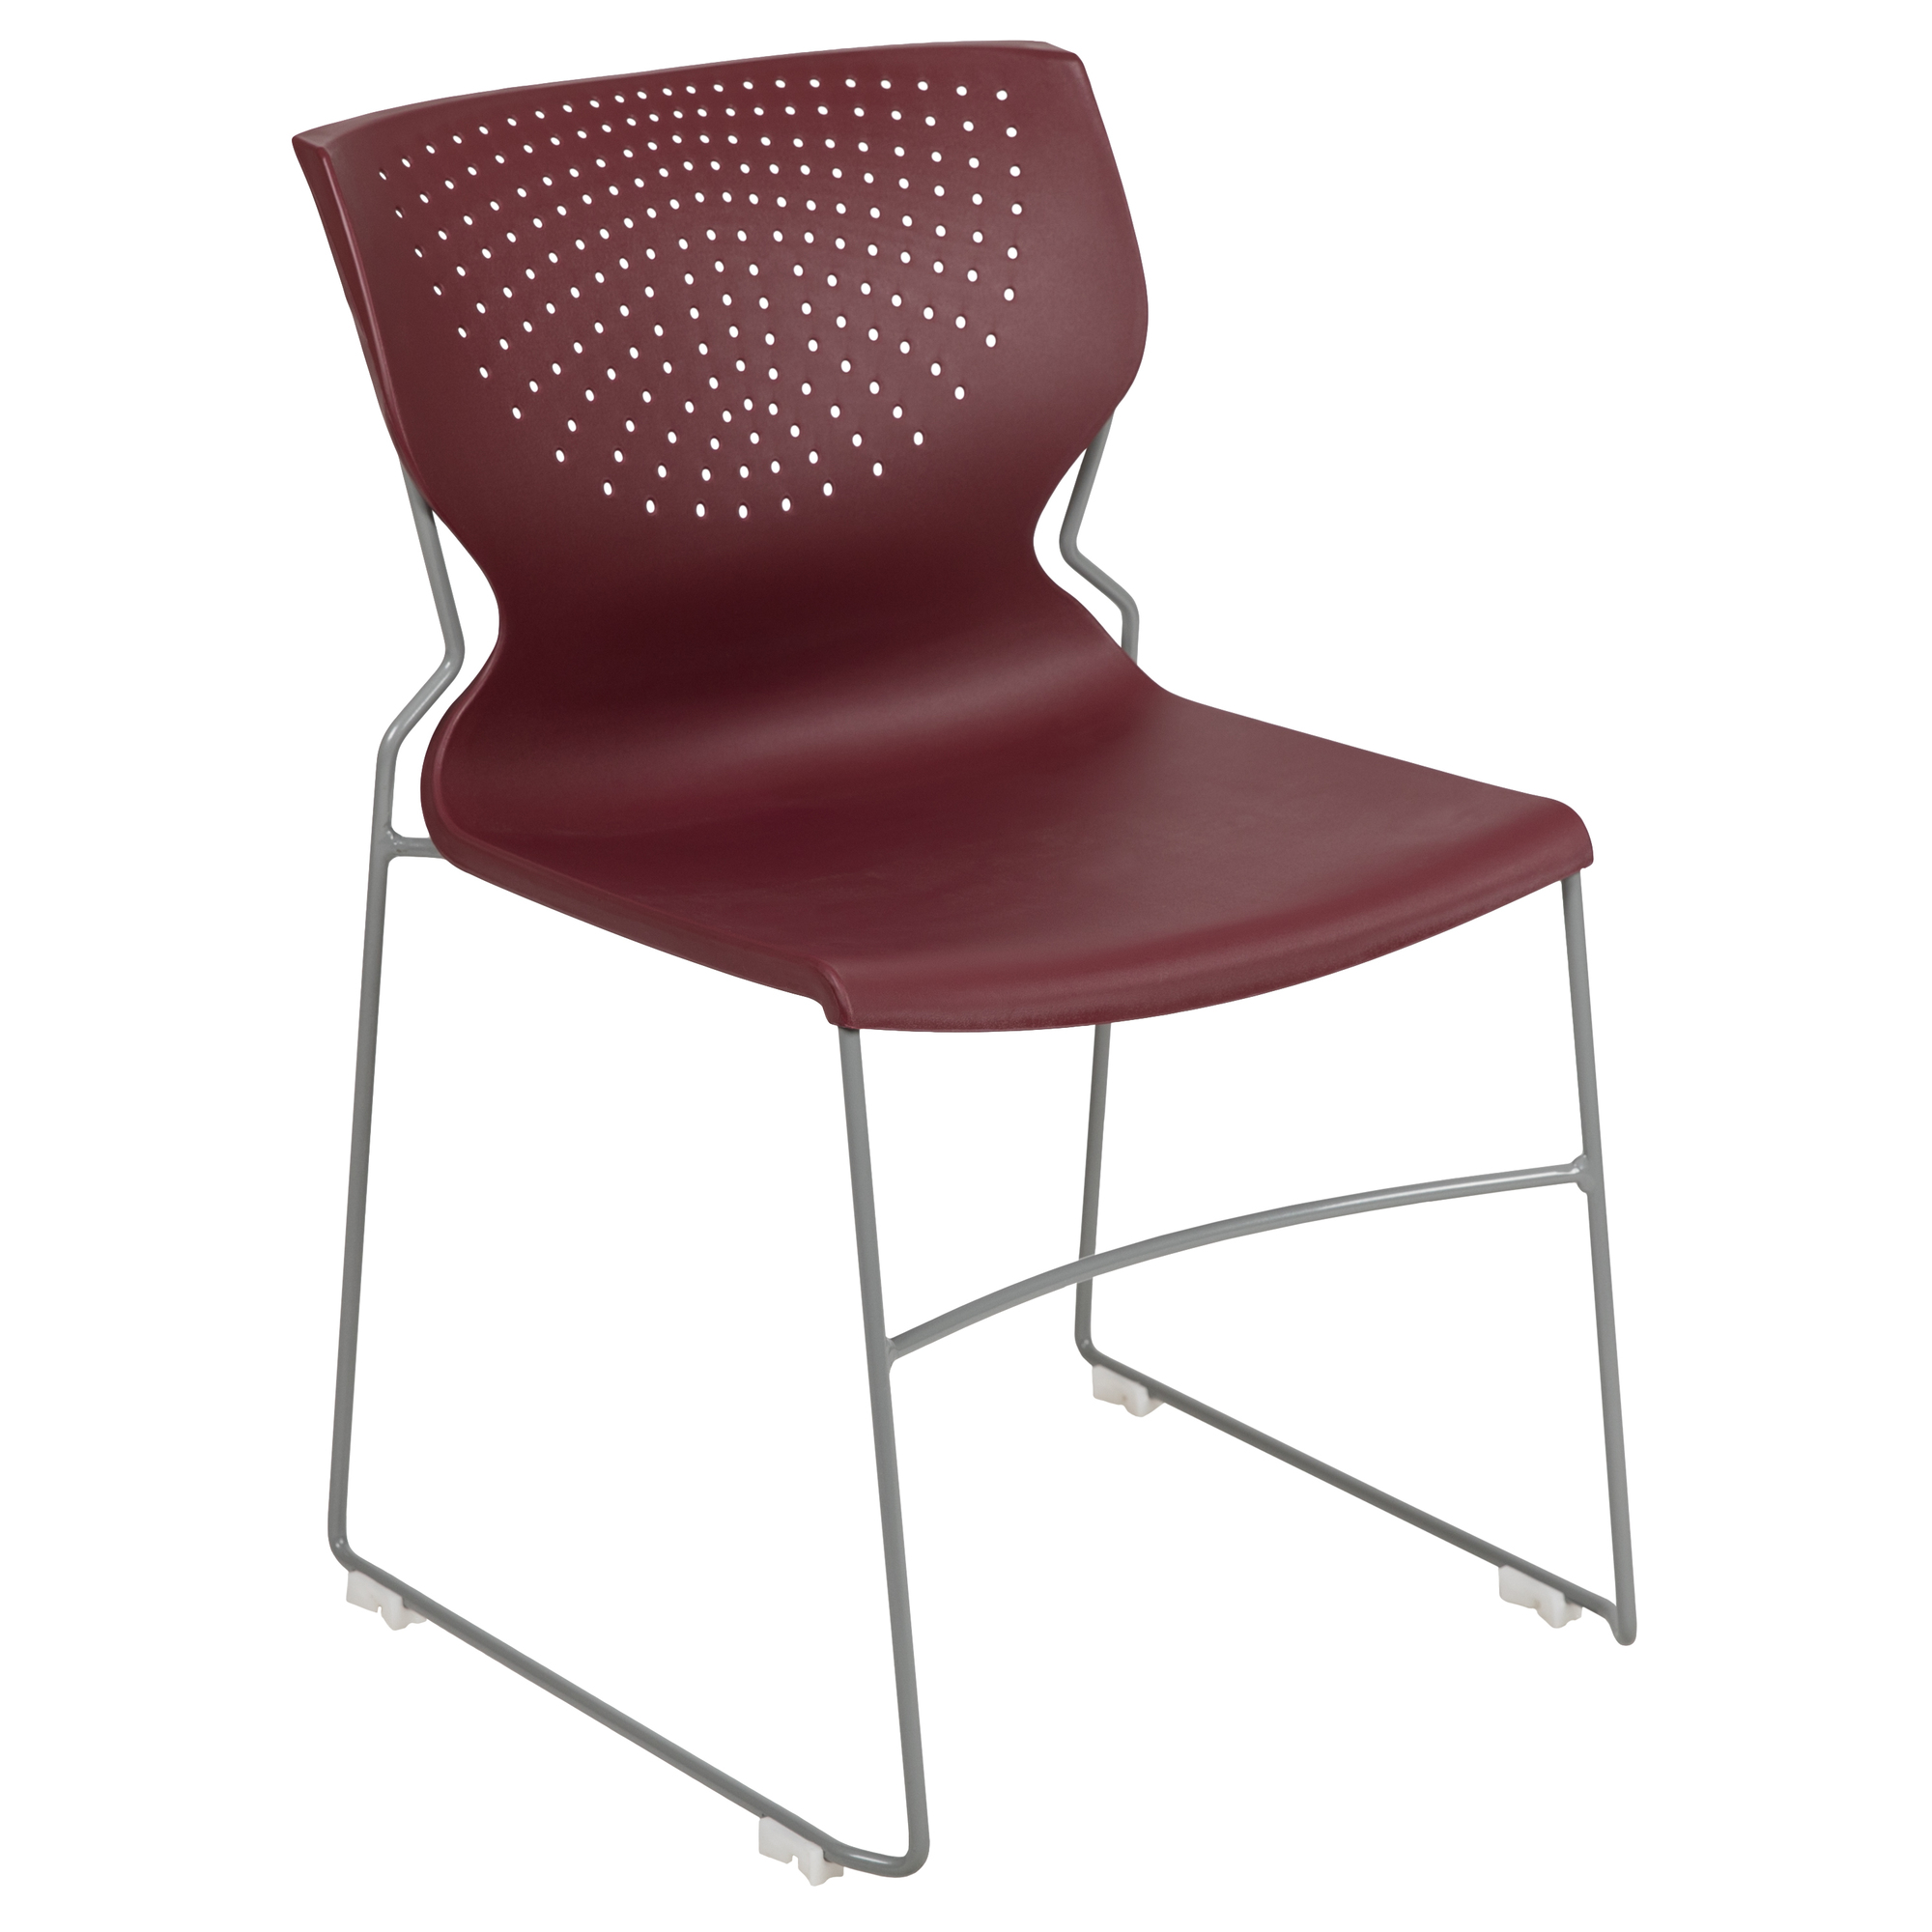 Flash Furniture, Burgundy Full Back Stack Chair with Gray Frame, Primary Color Burgundy, Included (qty.) 1, Model RUT438BY